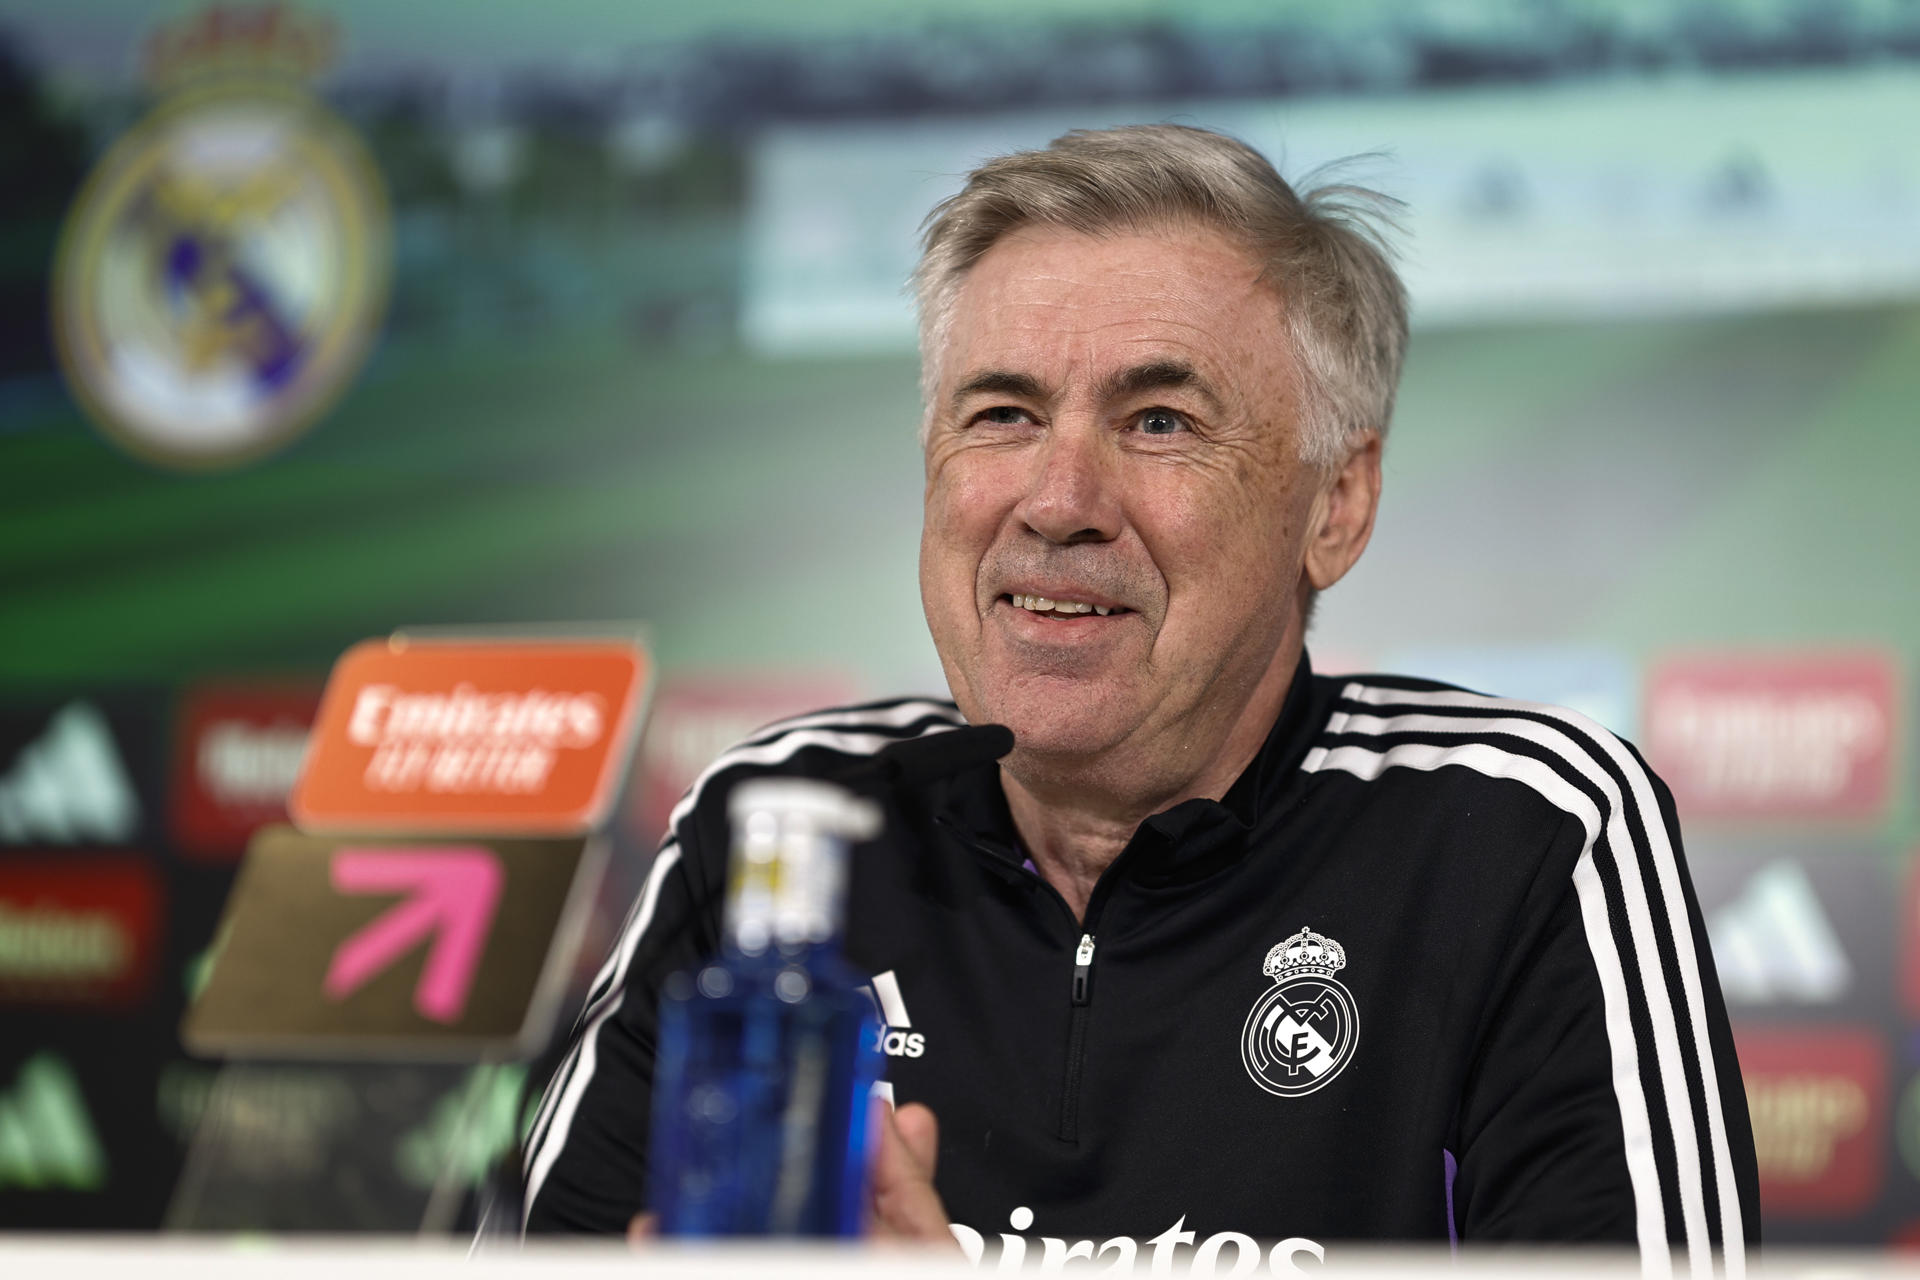 Real Madrid a team in transition, says Ancelotti ahead of Cup derby